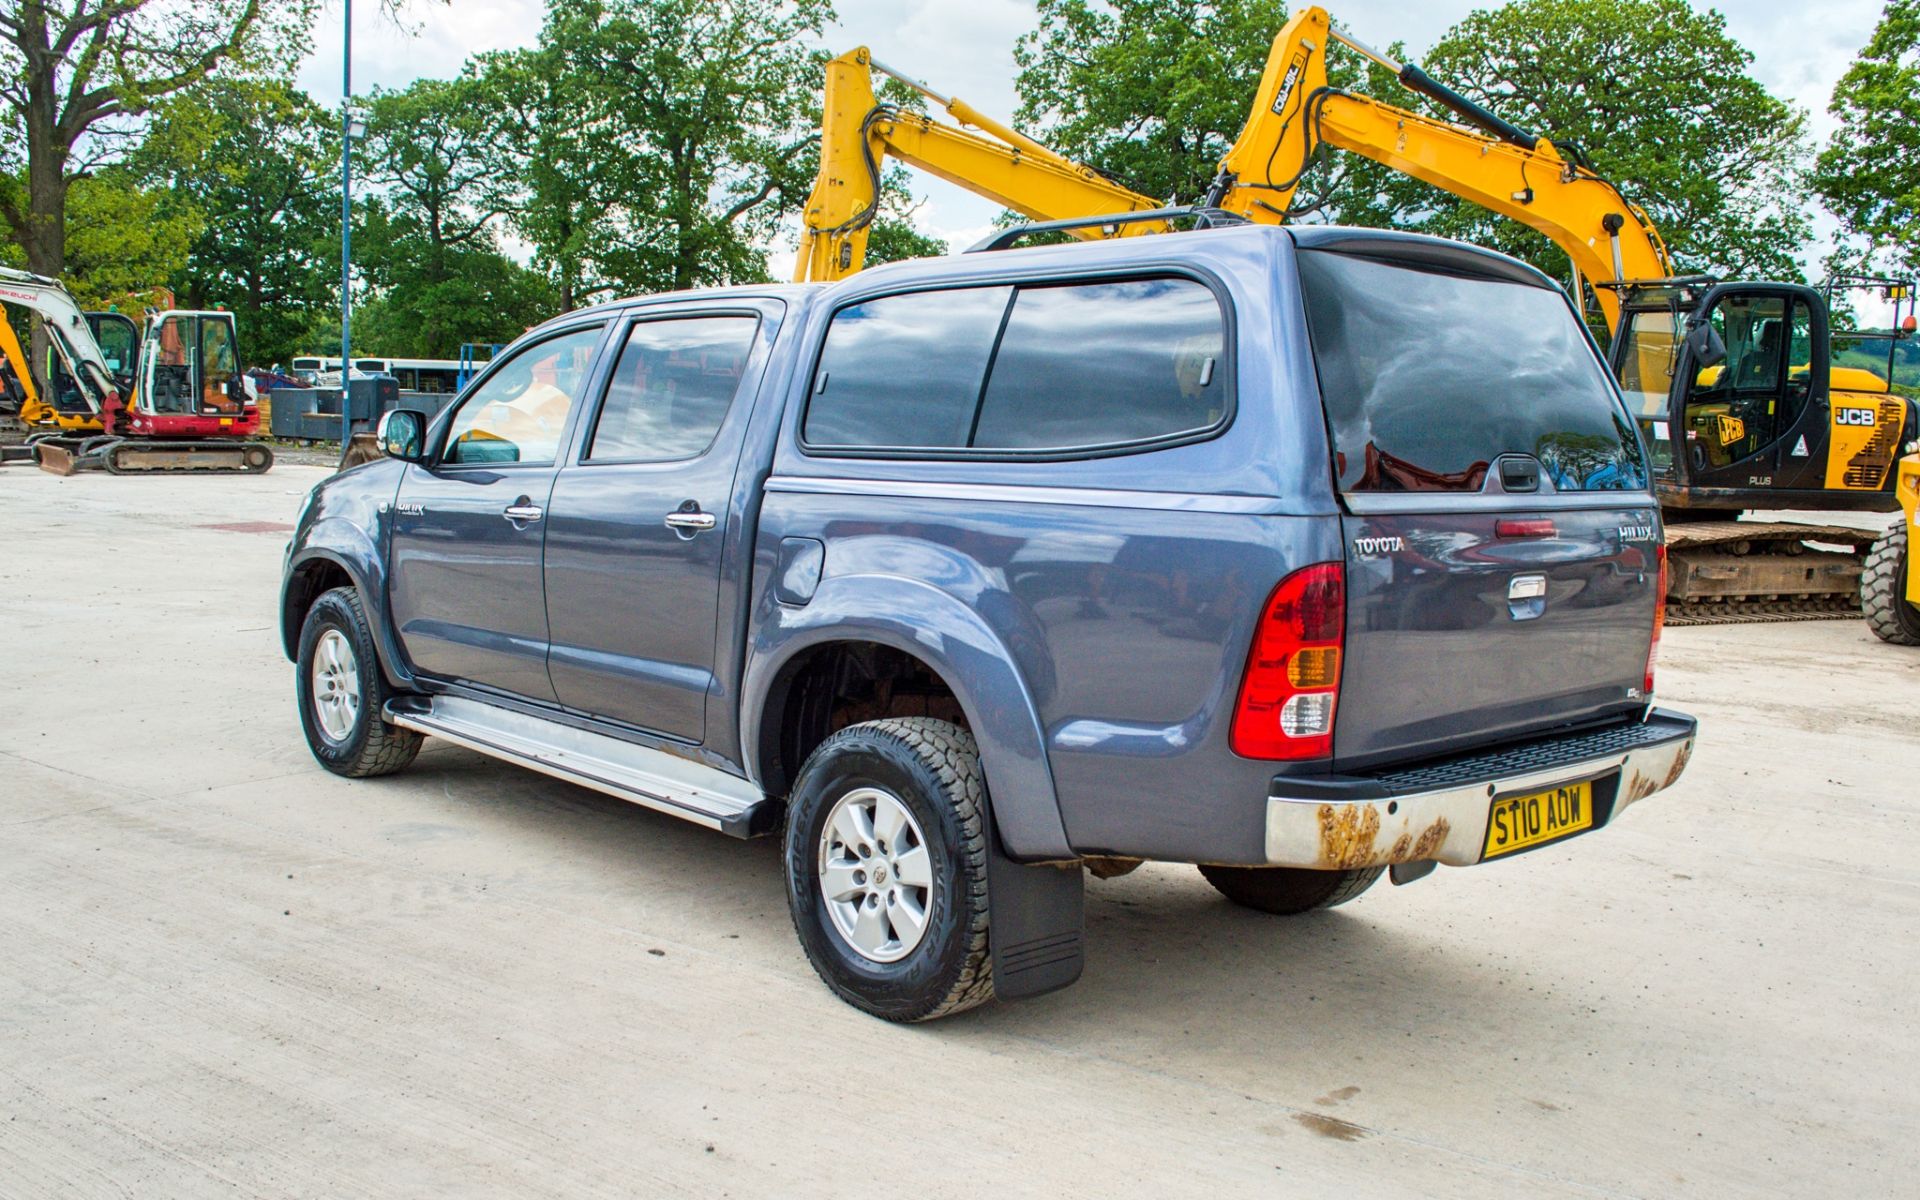 Toyota Hilux 2.5 D-4D 144 HL3 4wd manual double cab pick up Reg No: ST10 AOW Date of Registration: - Image 4 of 25